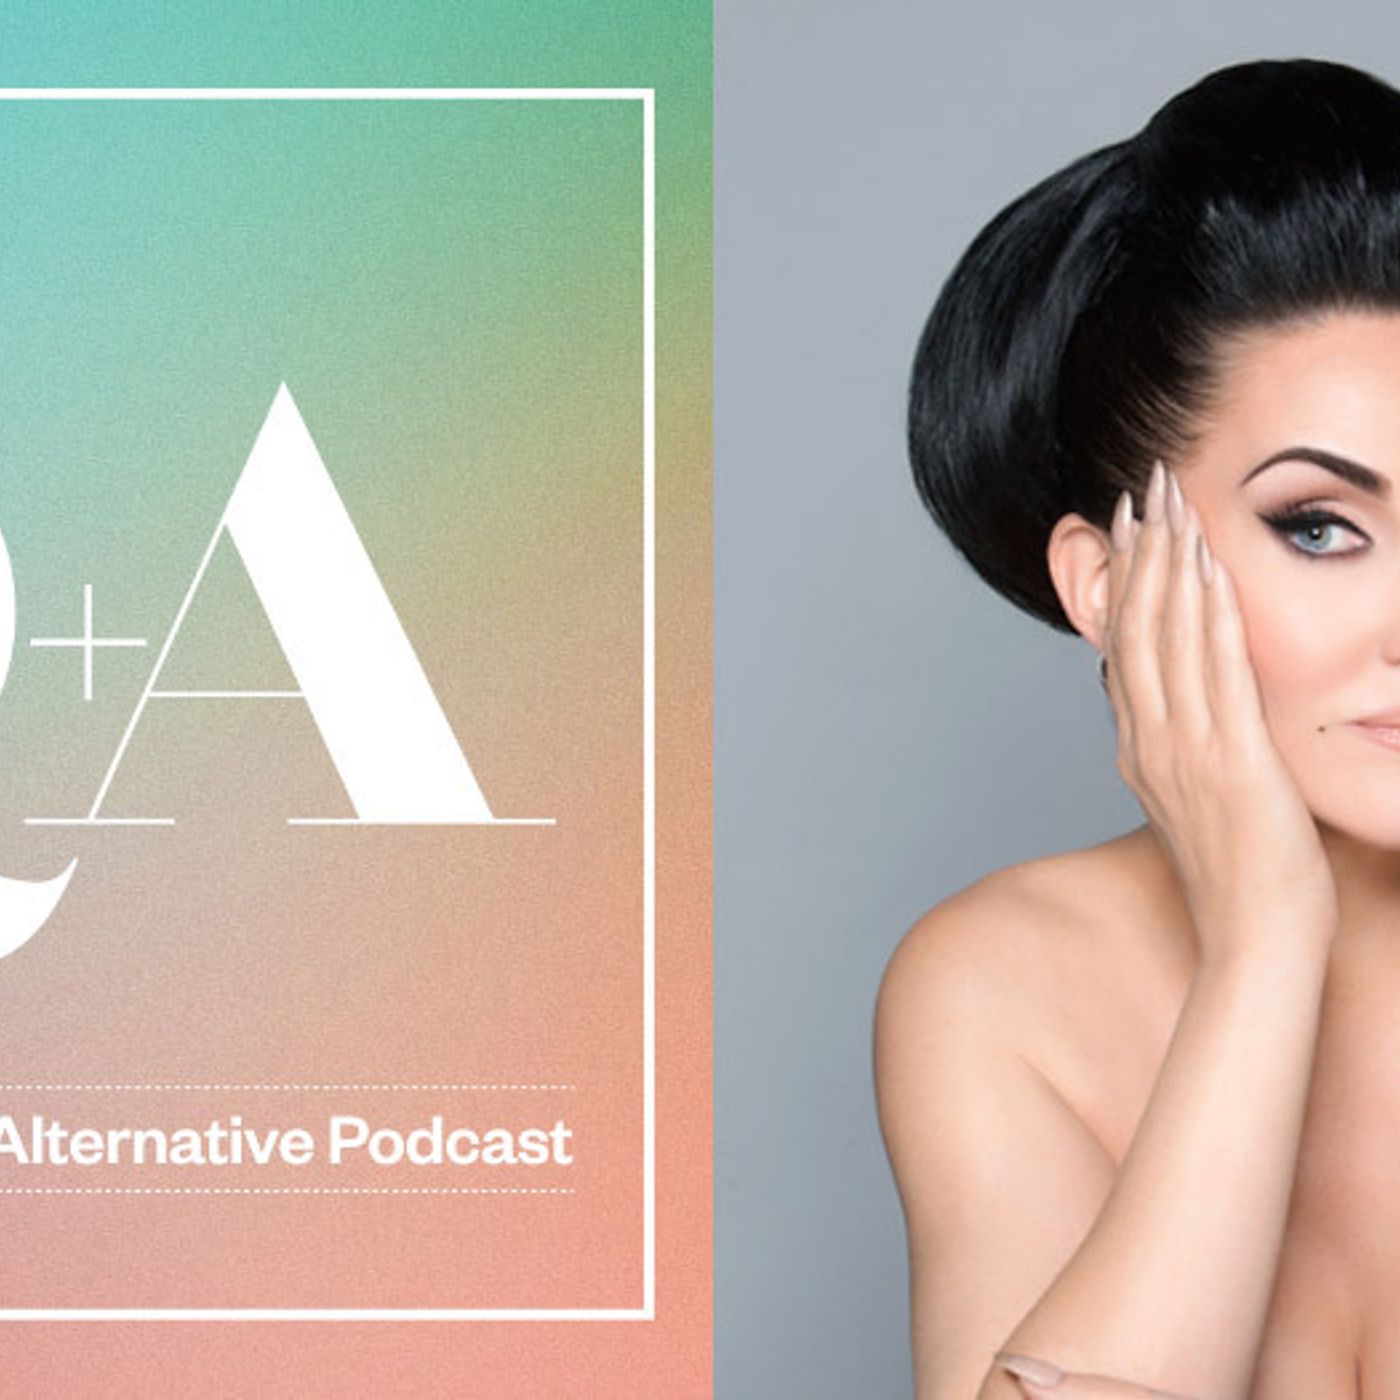 3: Serving Visage: We Caught Up with the Legendary Michelle Visage